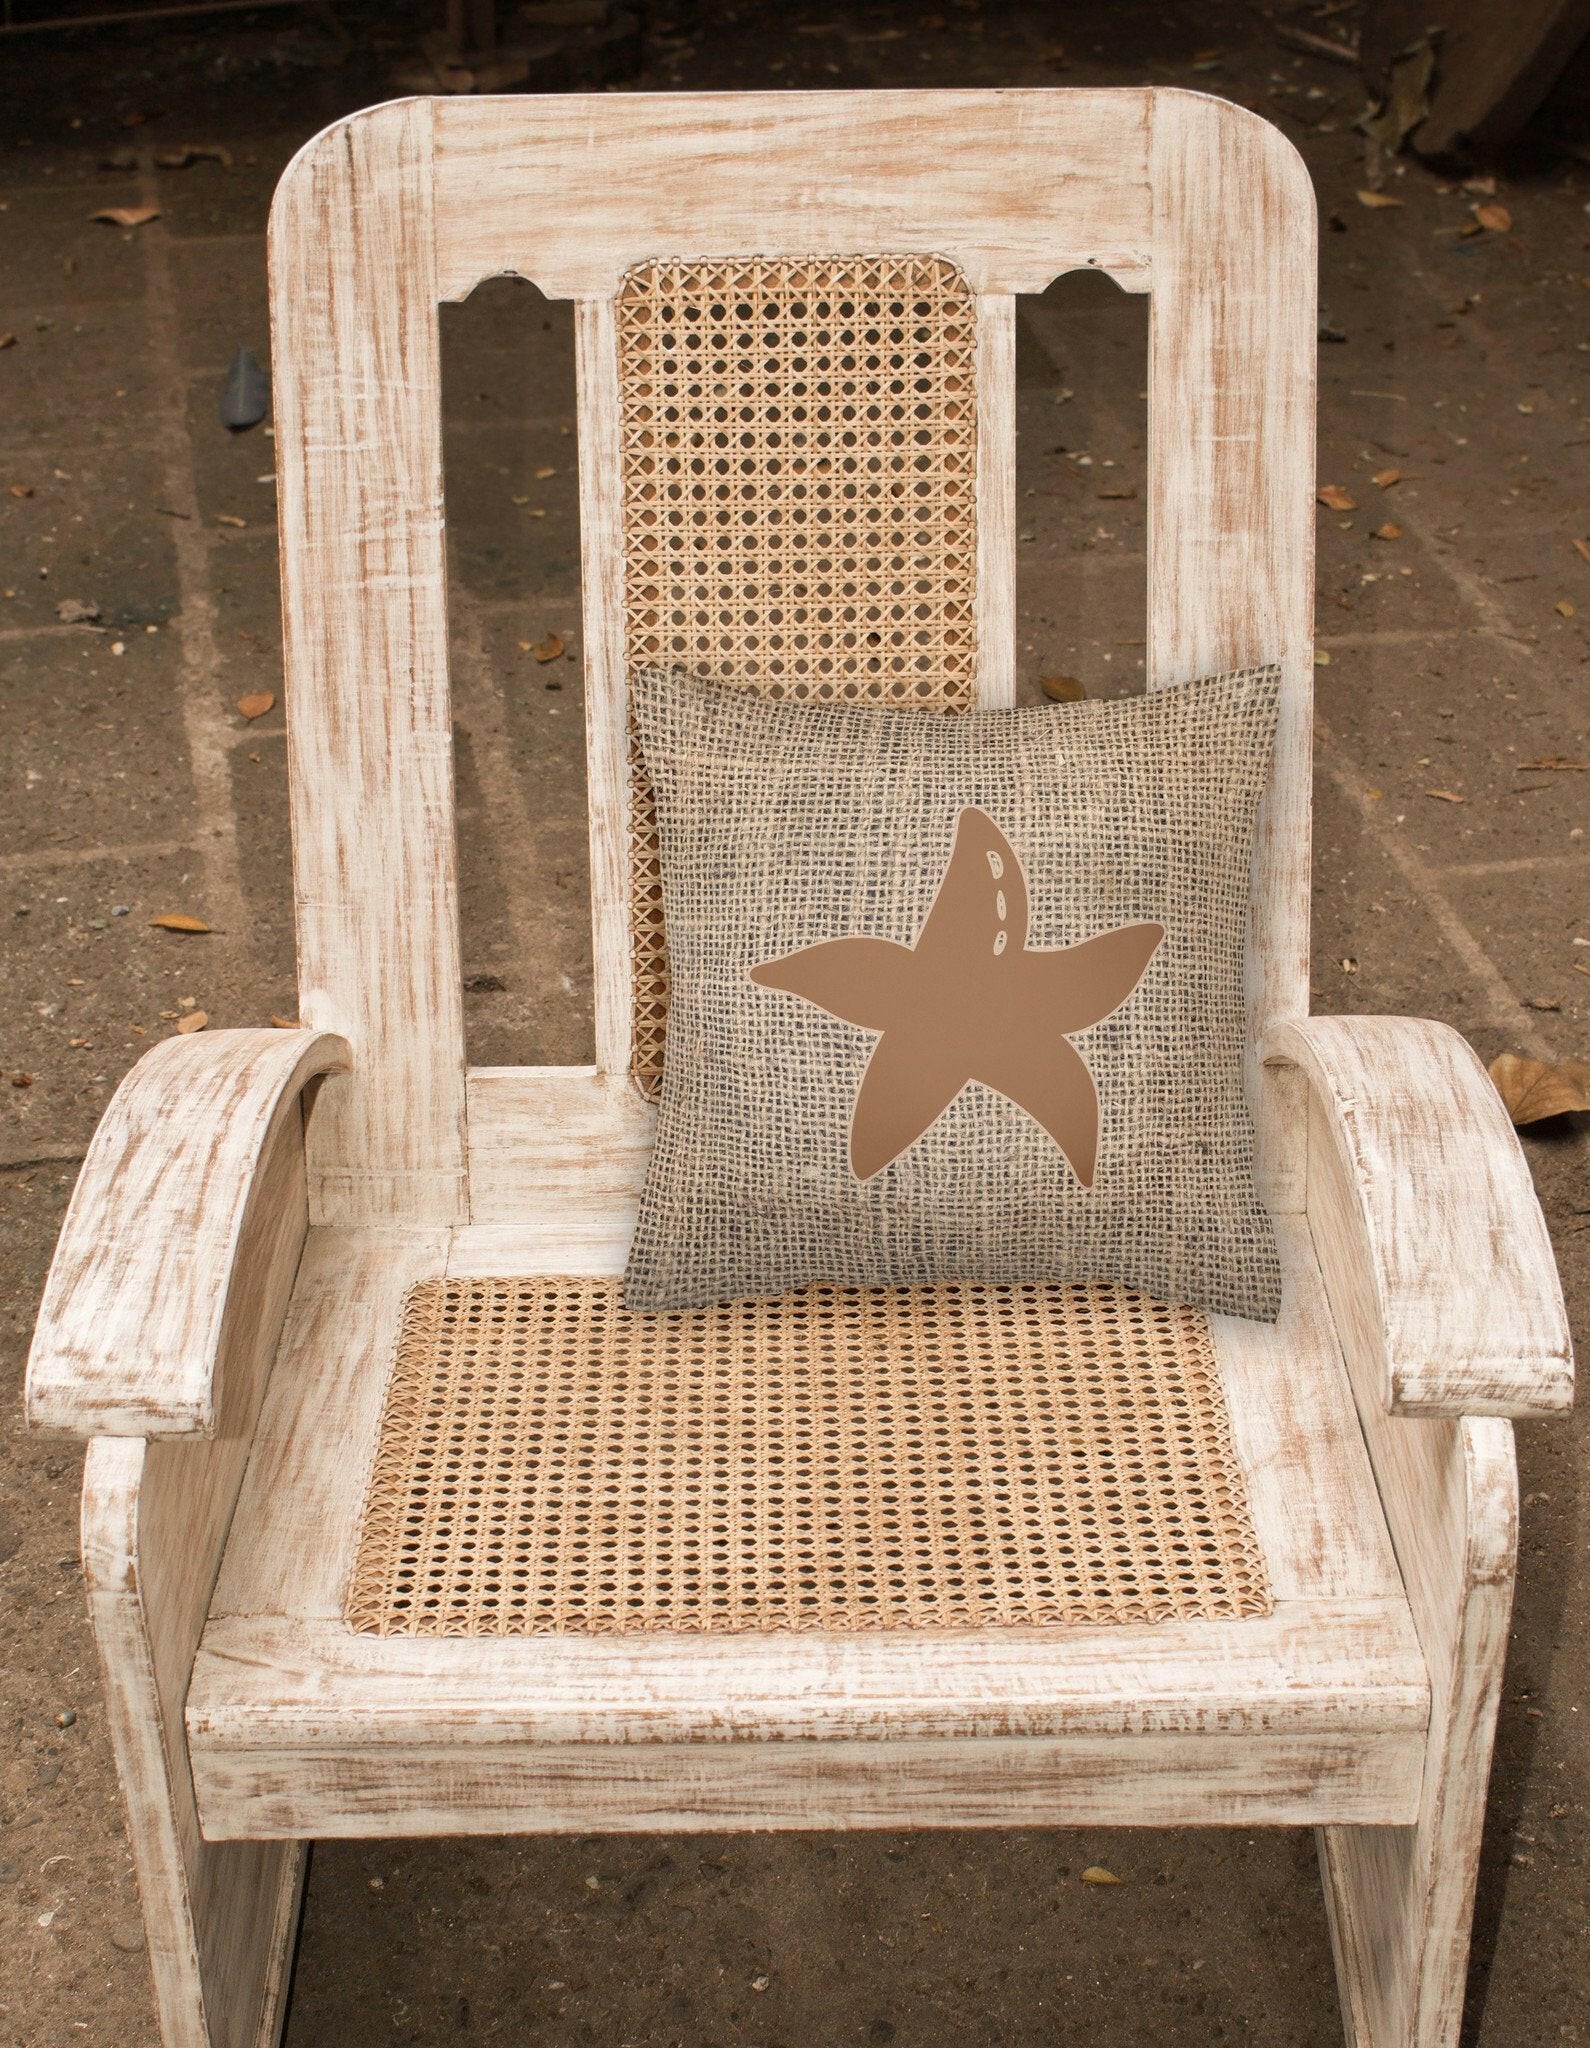 Starfish Burlap and Brown   Canvas Fabric Decorative Pillow BB1100 - the-store.com